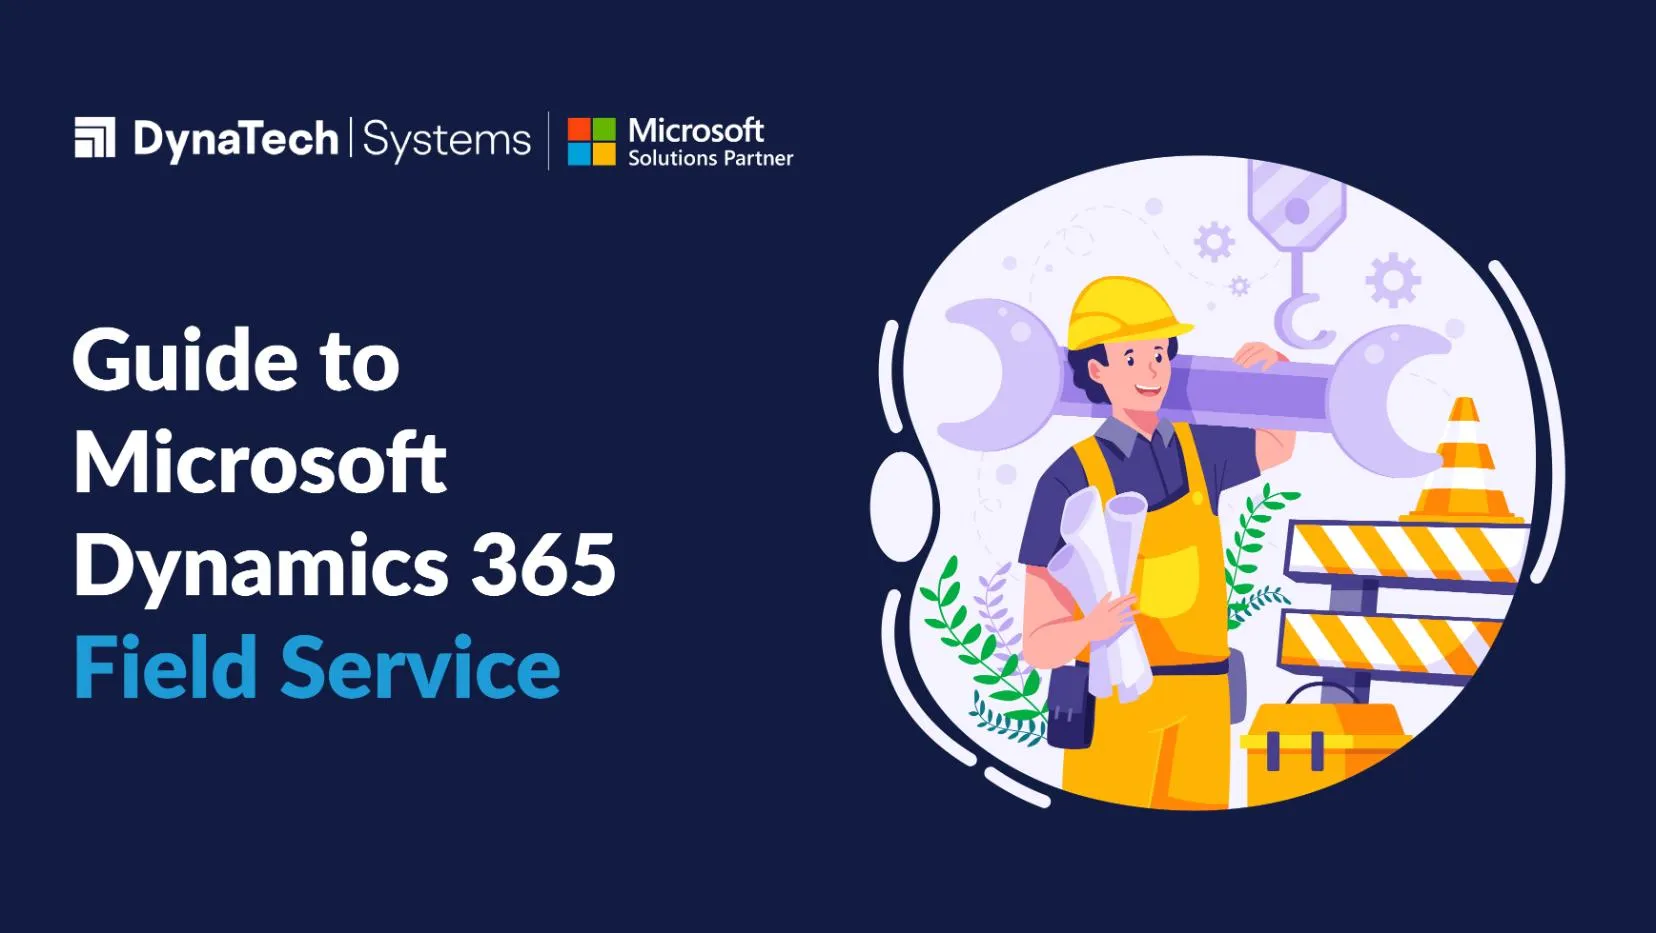 Guide to Microsoft Dynamics 365 Field Service